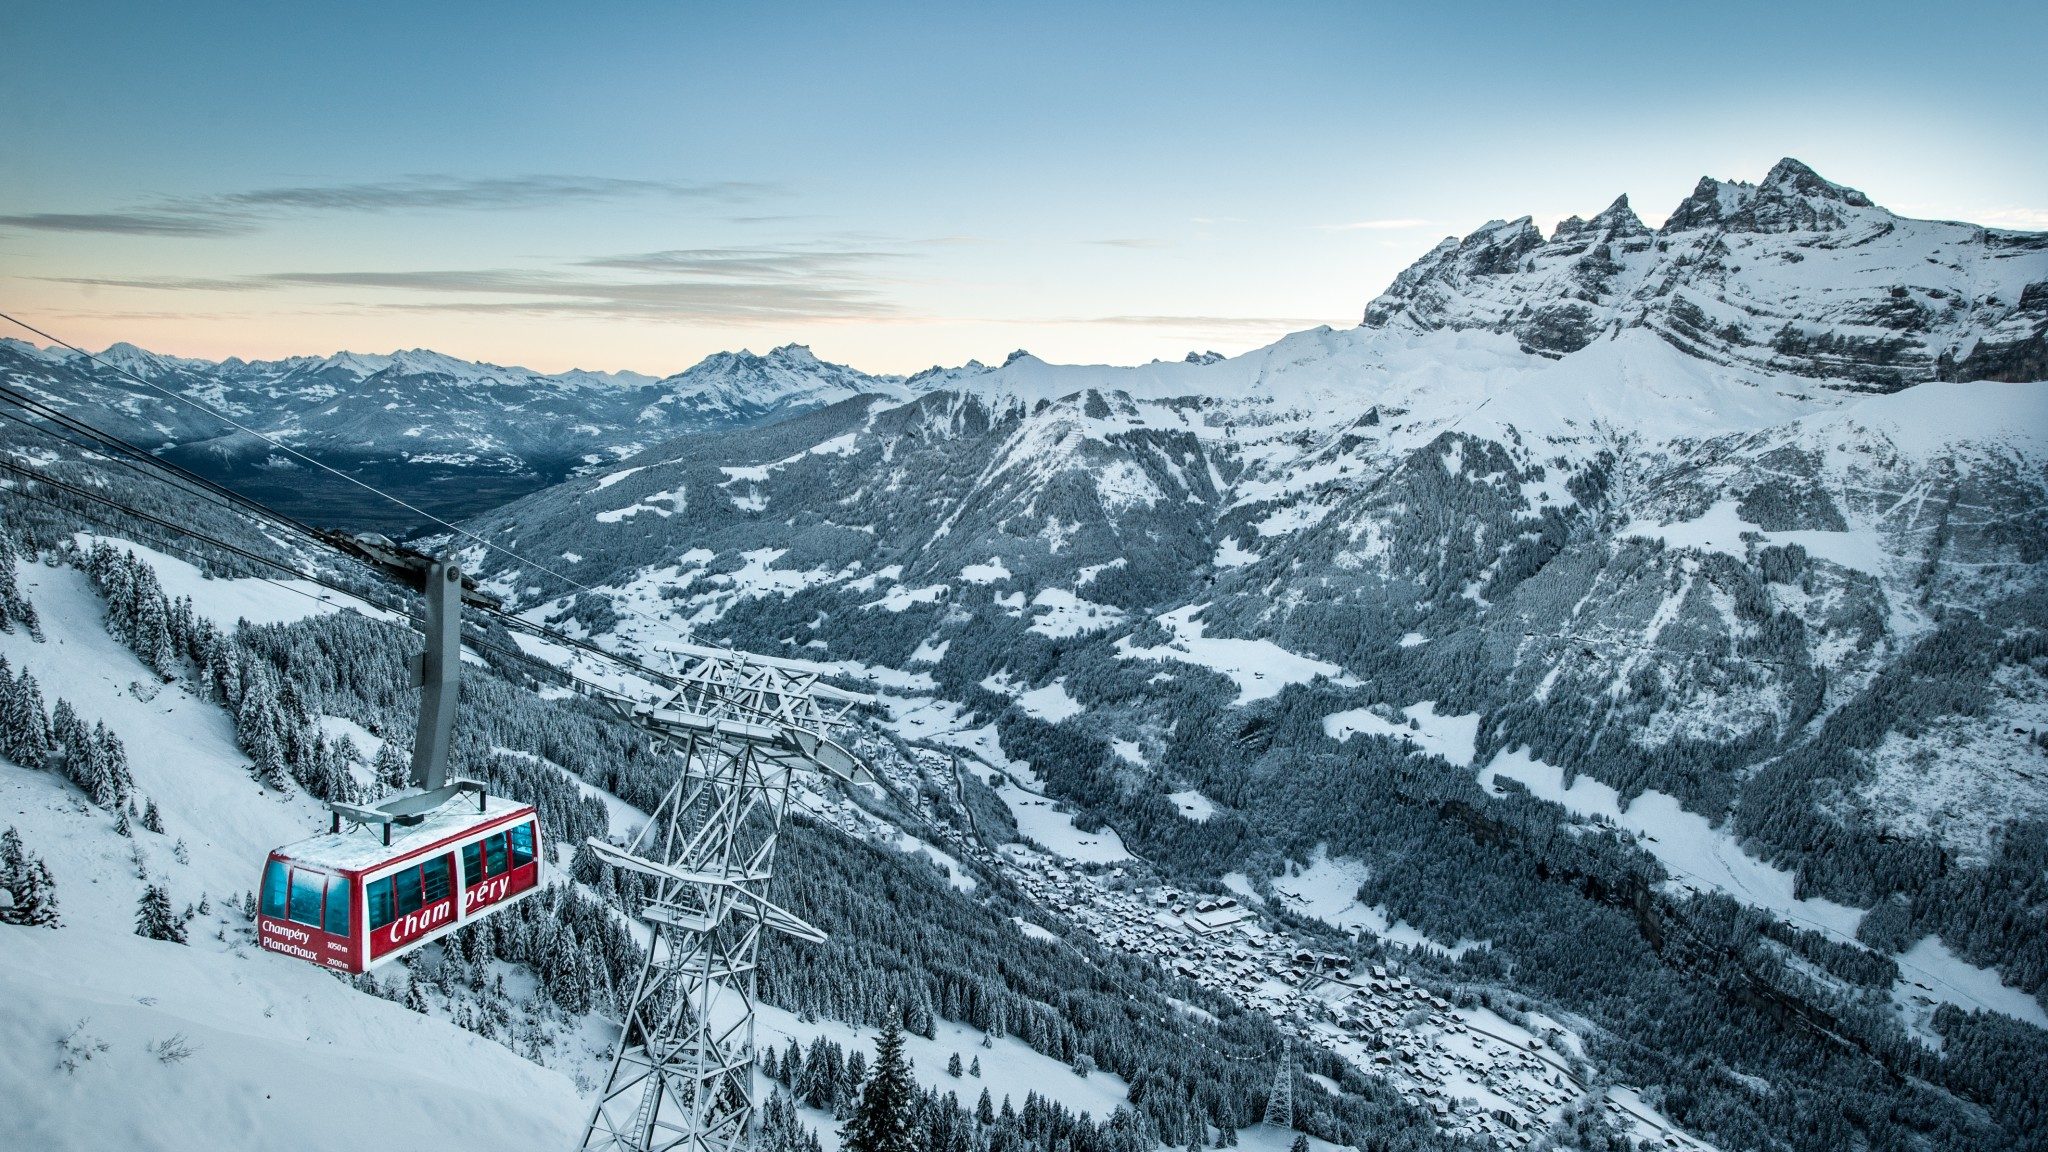 Fall In Love With Switzerland This Winter